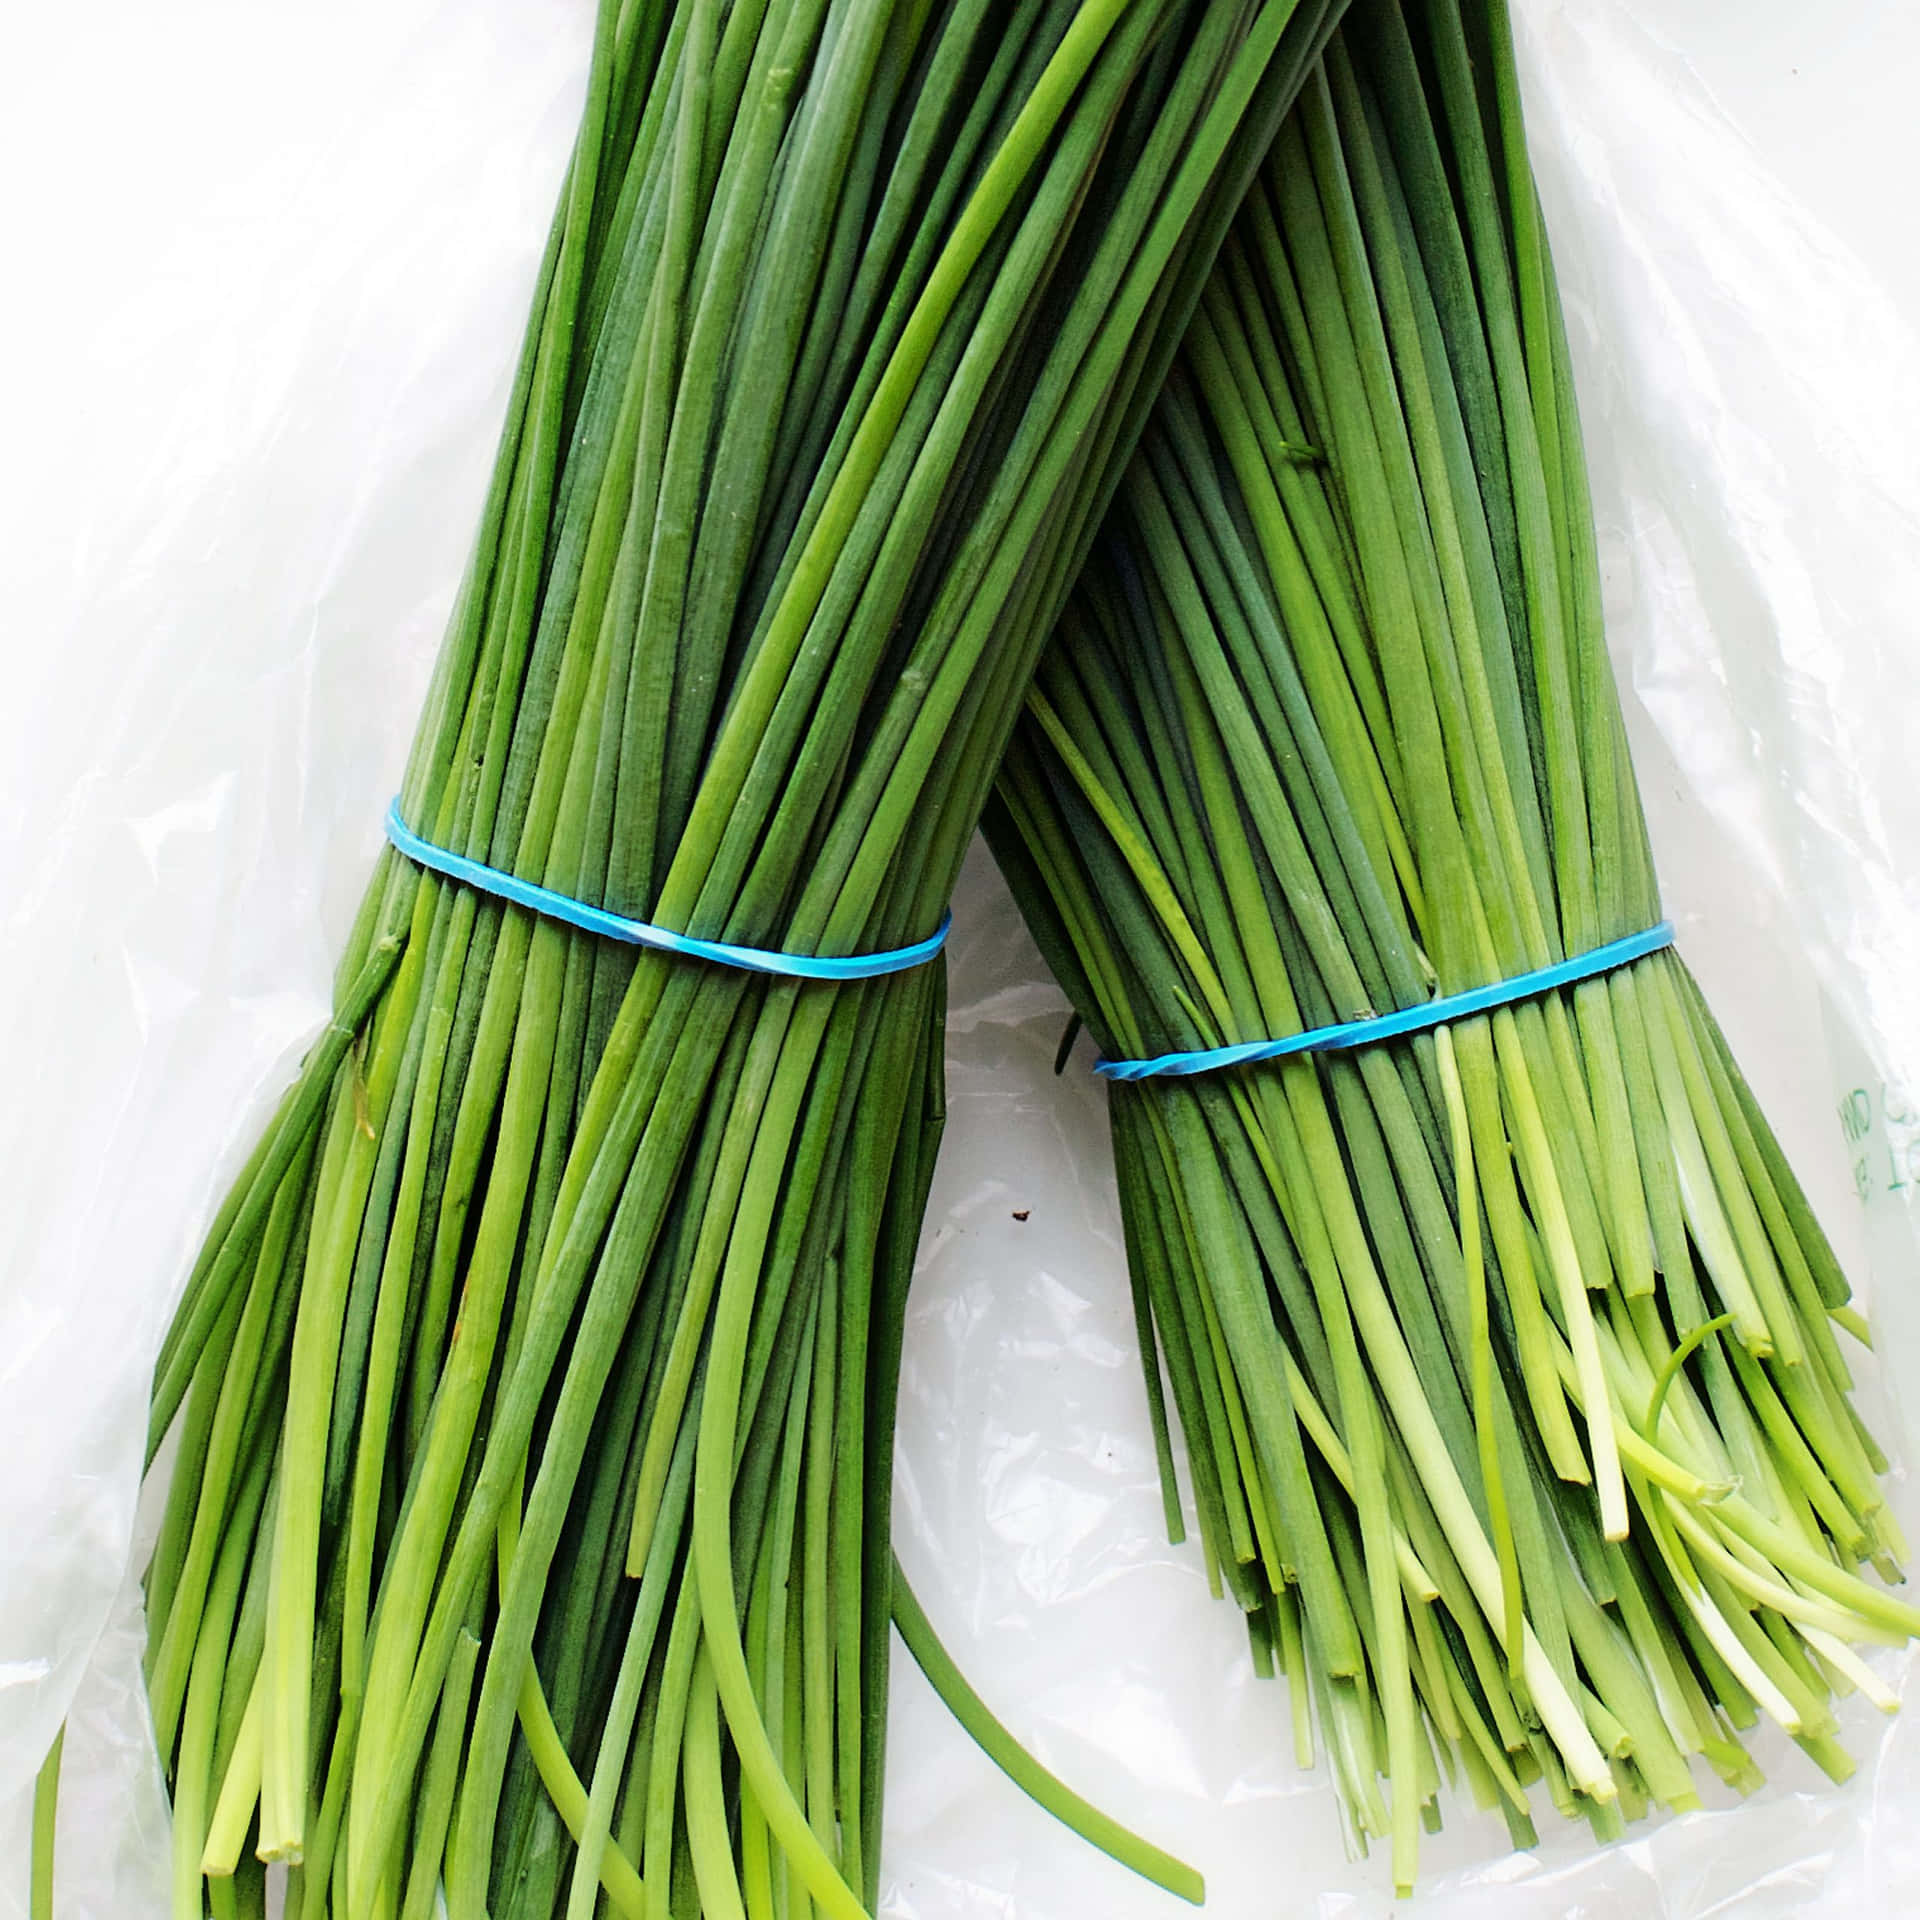 Two Bunches Of Chives On Plastic Bag Wallpaper